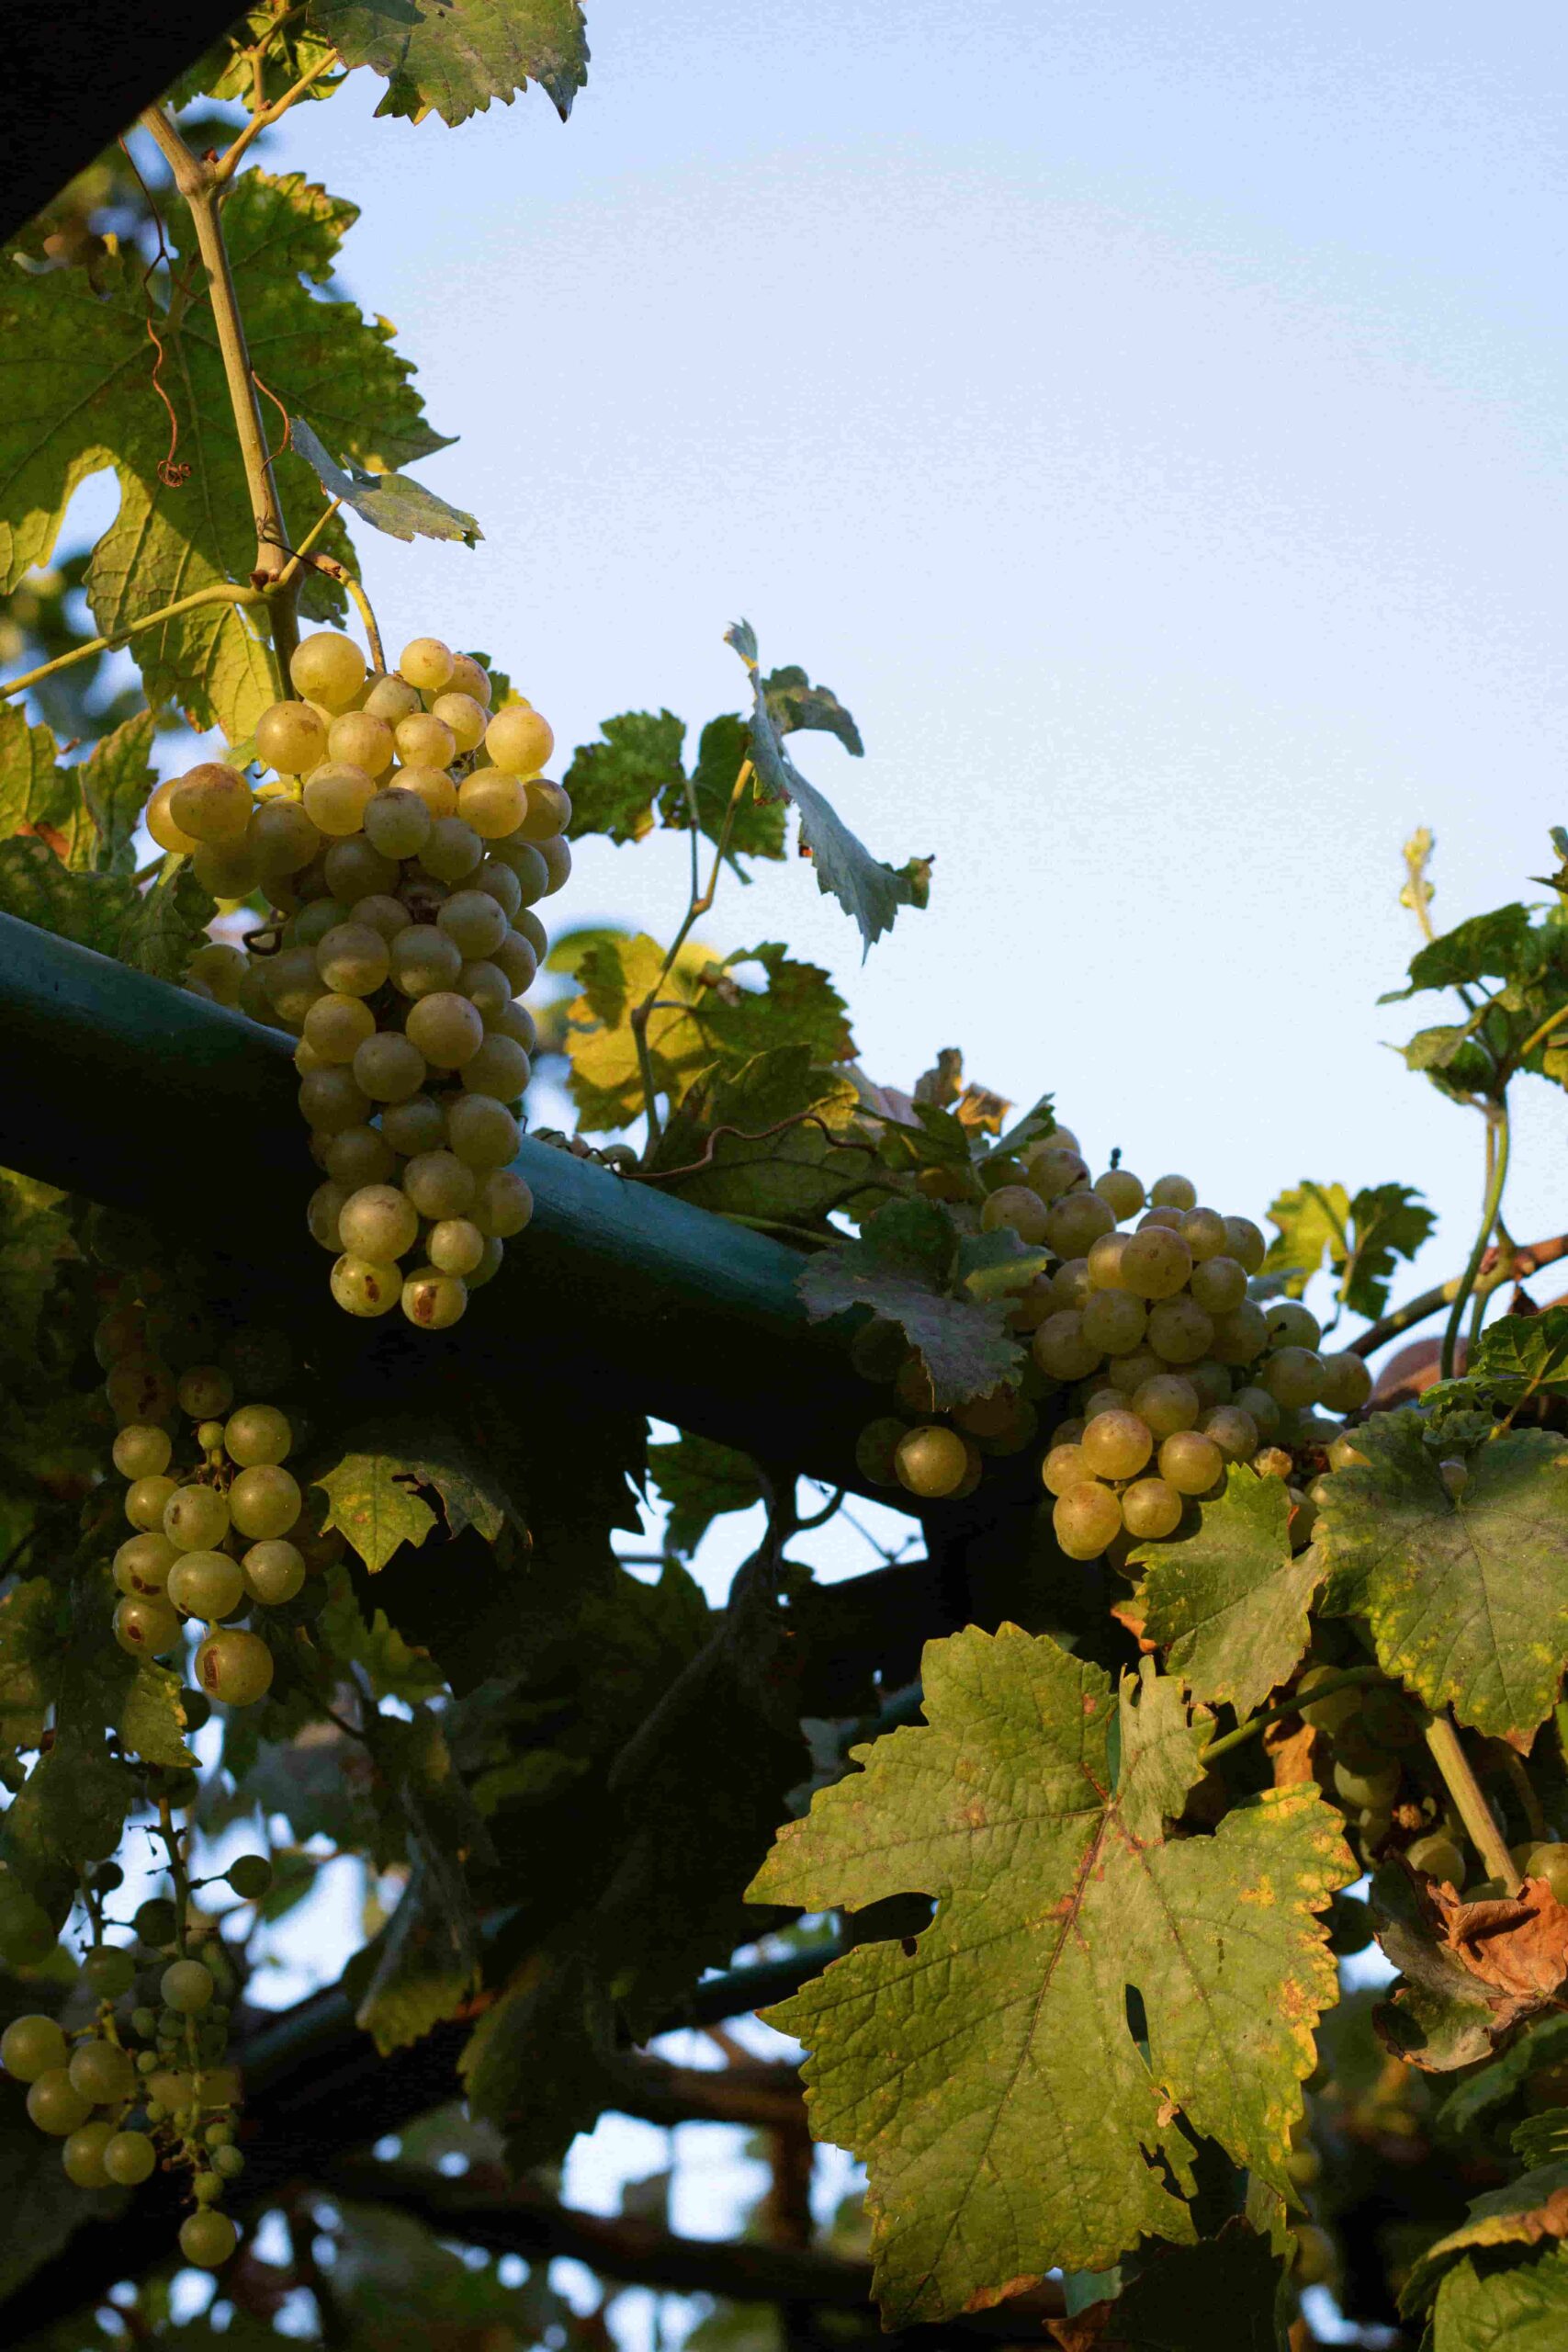 Grapes on a vine with the blue sky in the background